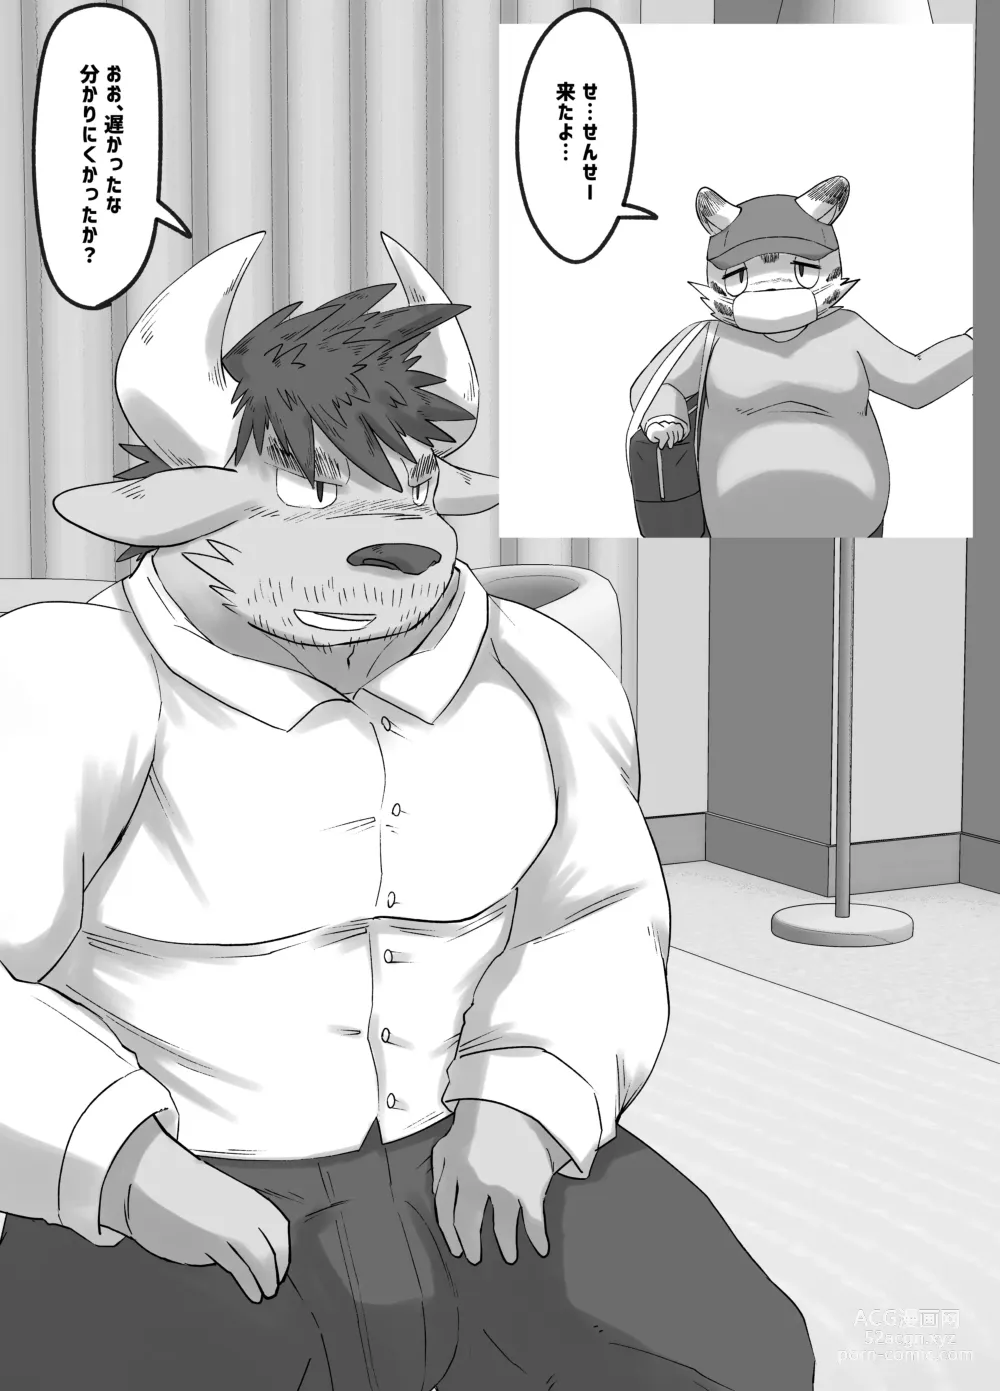 Page 4 of doujinshi Muscular Bull Teacher & Chubby Tiger Student 4